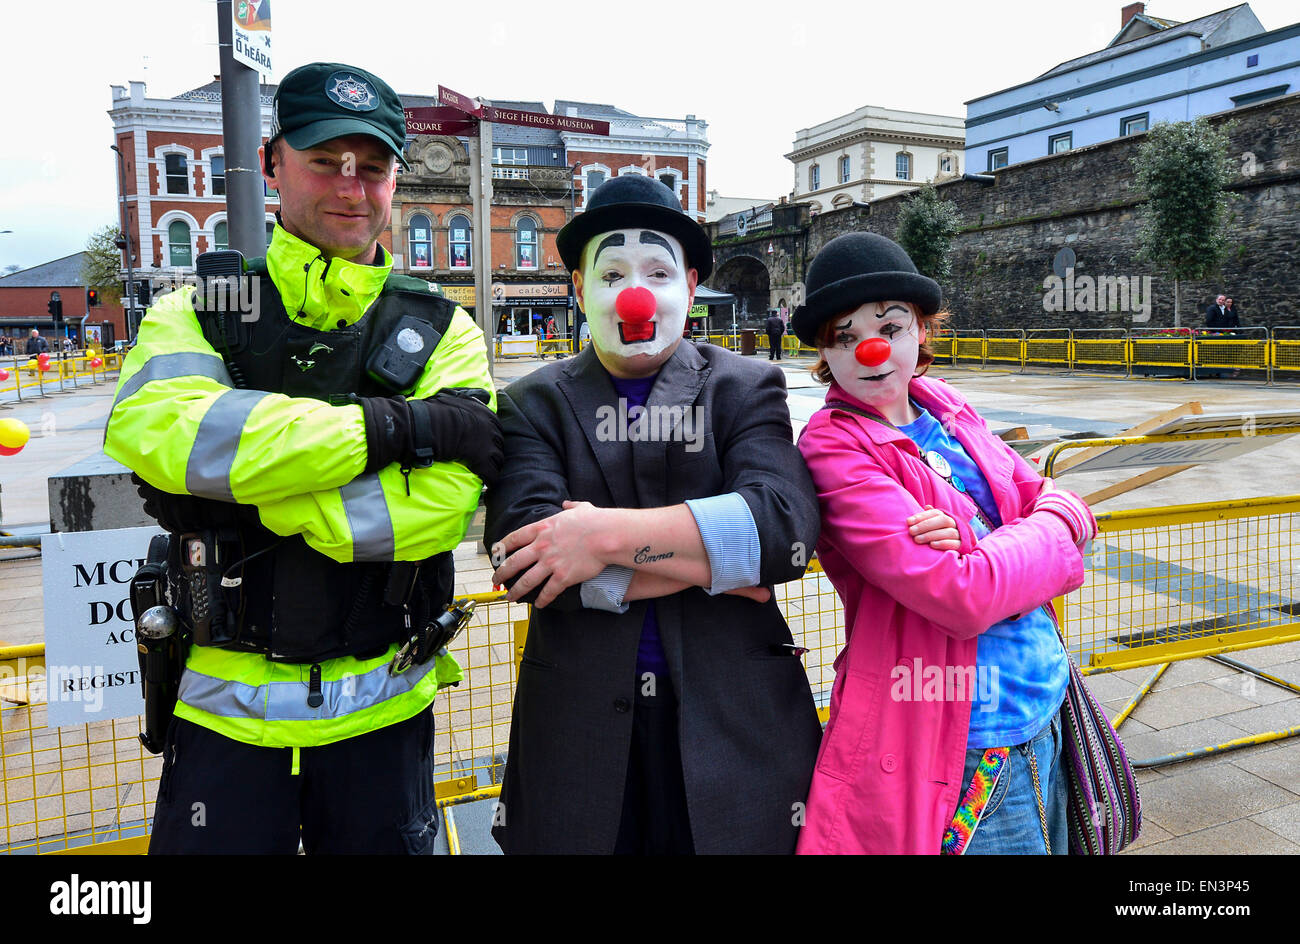 PSNI constable posing with two clowns, at a charity event in the Guildhall Square, Derry, Londonderry. Stock Photo